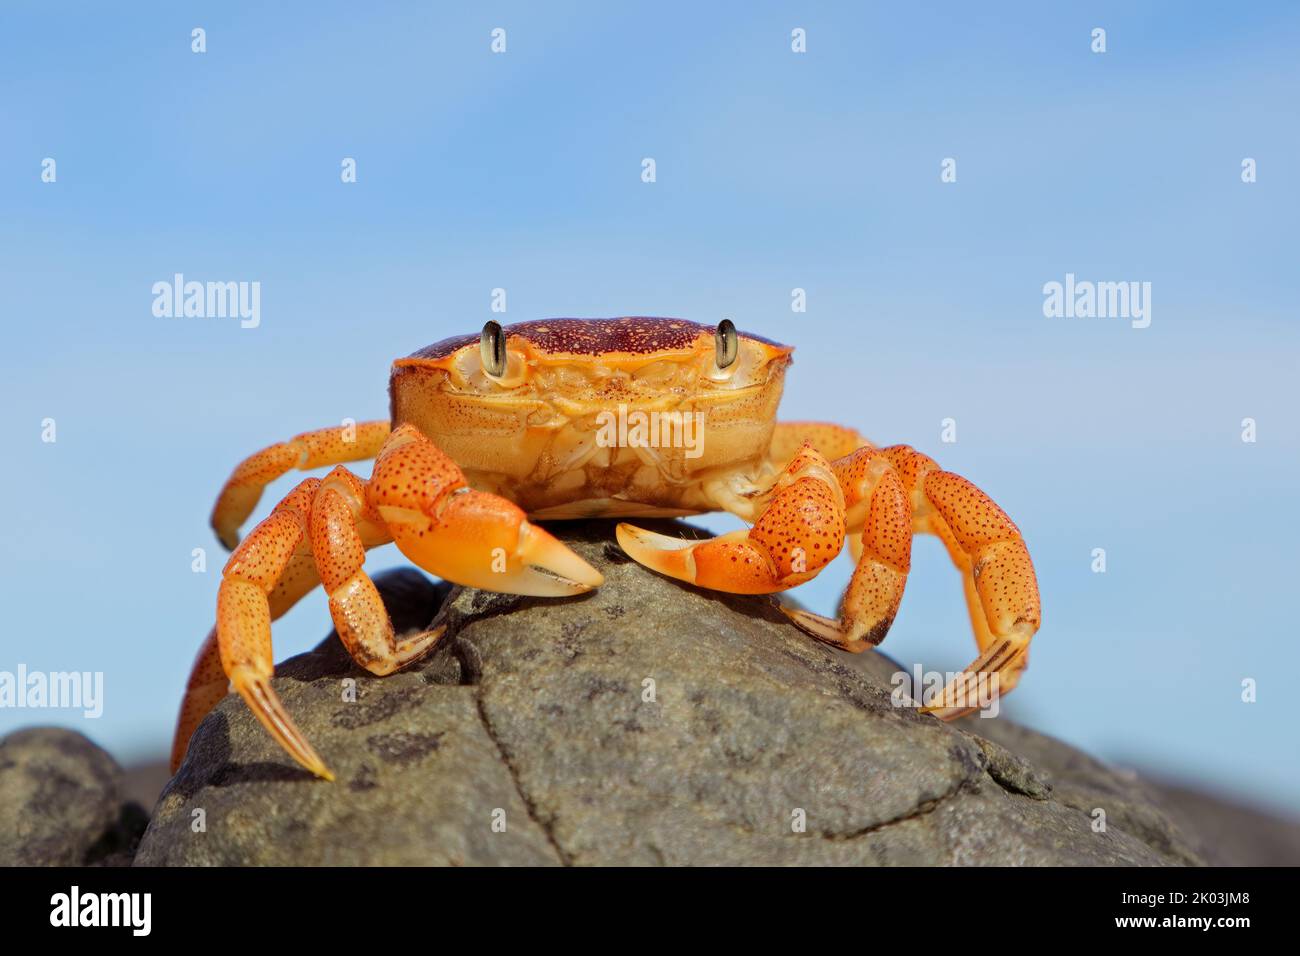 A common shore crab (Cyclograpsus punctatus) on a rock against a blue sky, South Africa Stock Photo